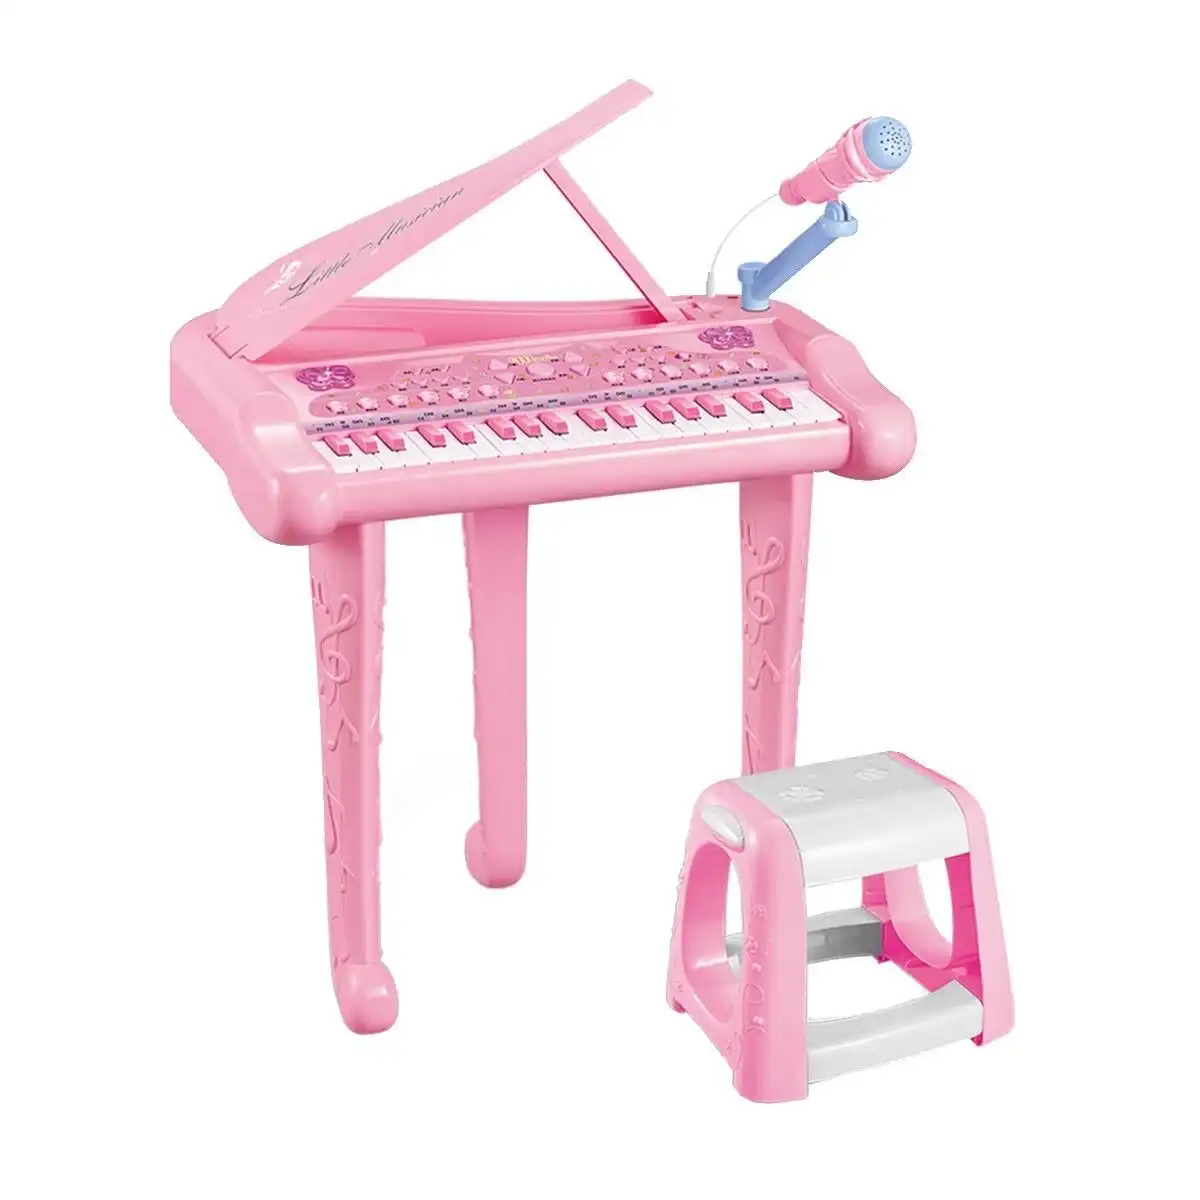 Ausway 37 Key Kids Electronic Keyboard Piano Organ Musical Toy with Microphone & Stool